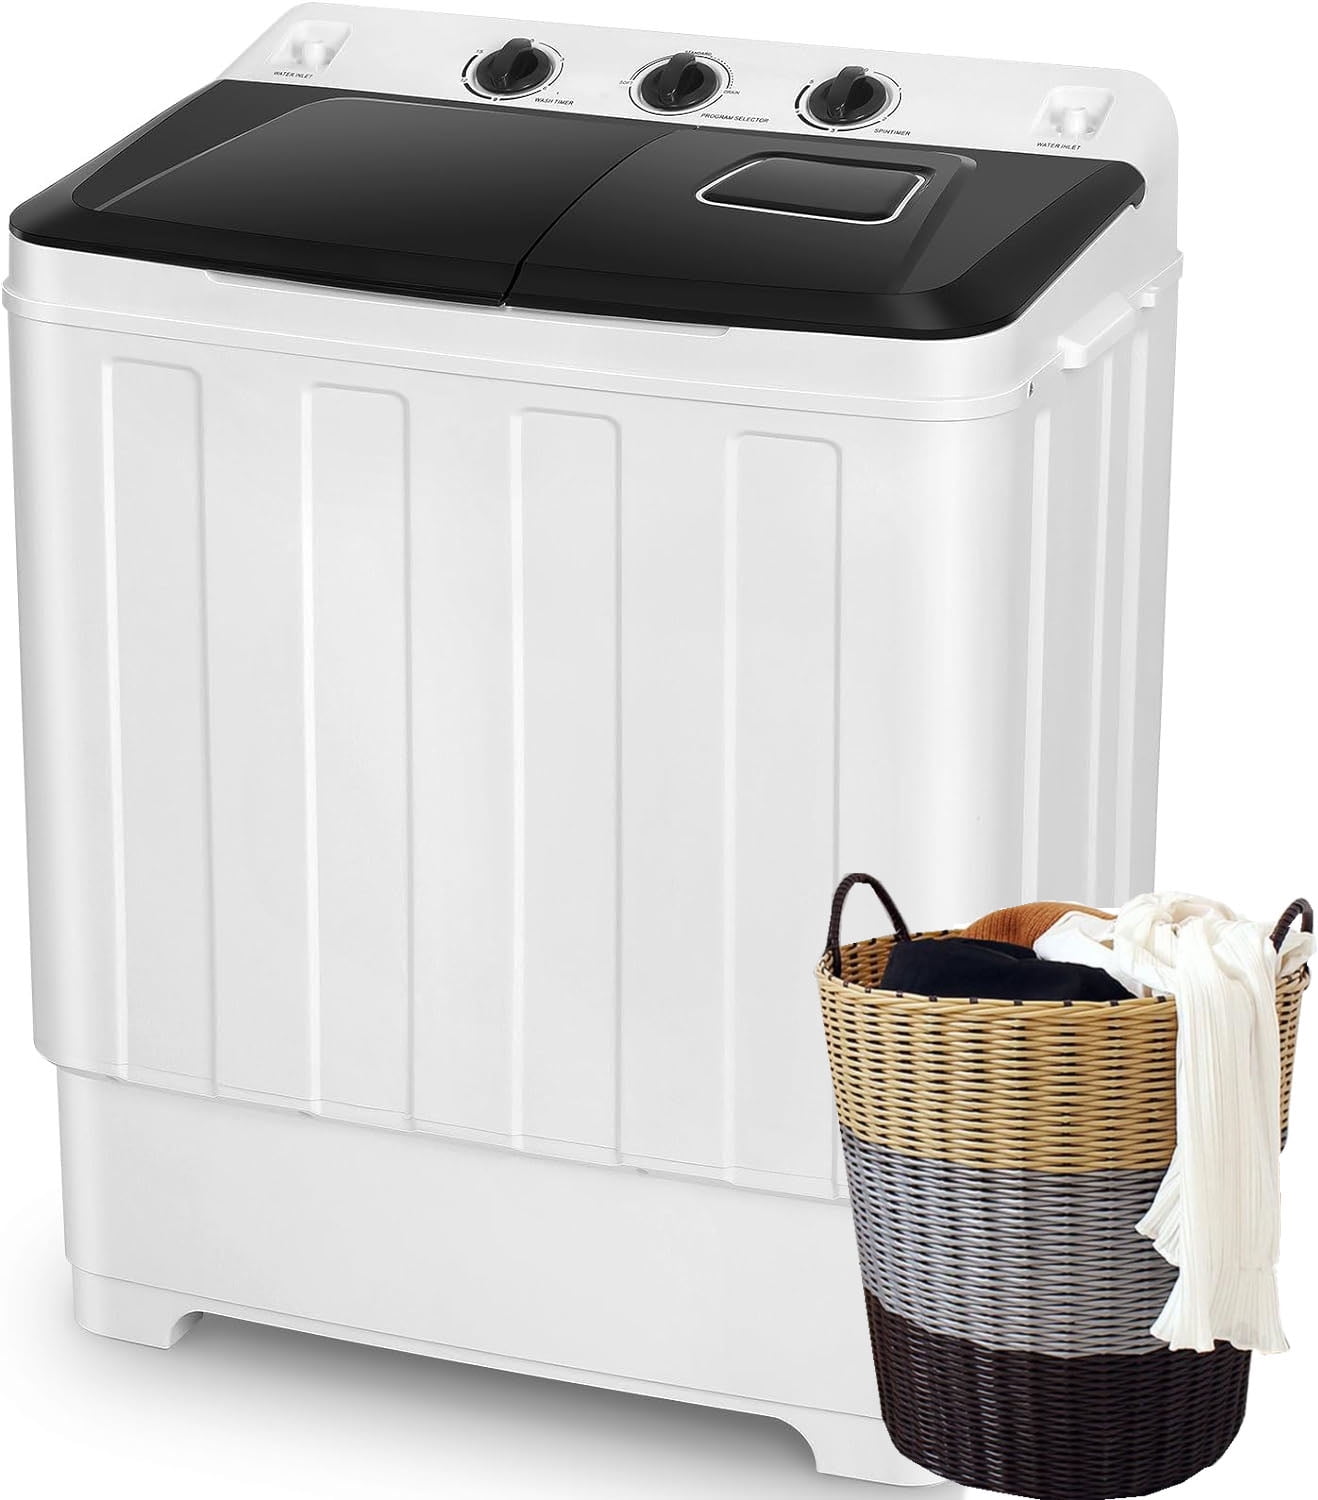 VCJ Portable Washing Machine, Twin Tub Washing Machine Laundry Compact  Washer spinner Combo with 14lbs capacity, 9Lbs Washer and 5Lbs Spinner  dryer